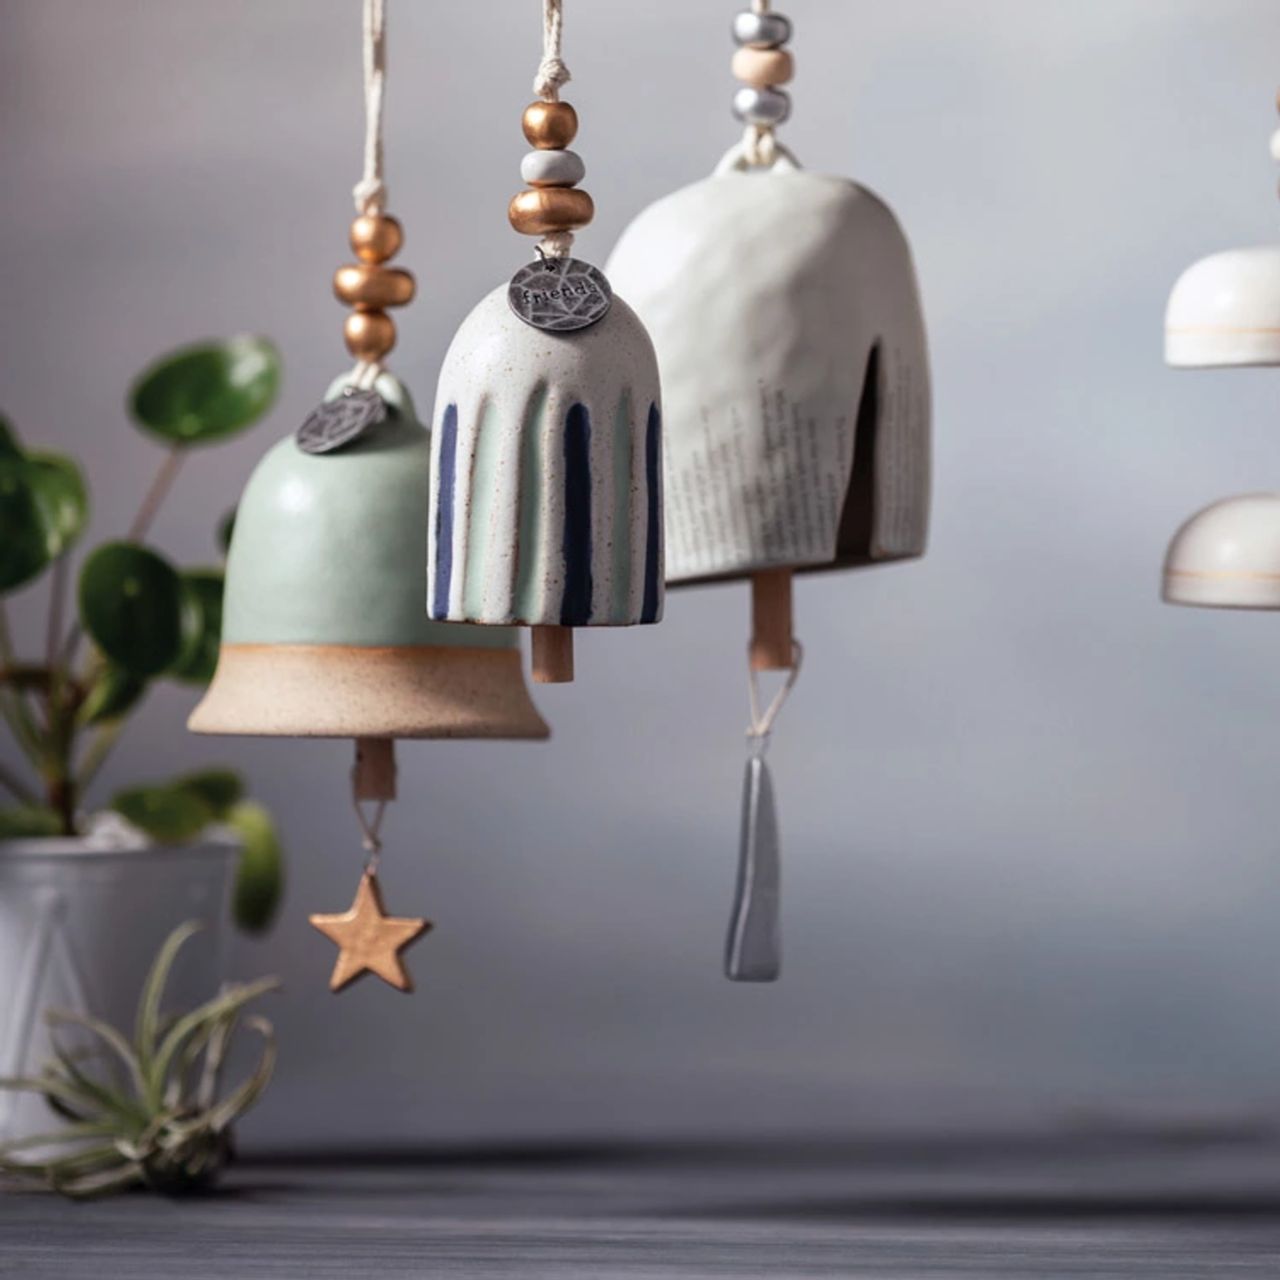 Inspired Everyday Collection Inspired Bell - Hero  The Inspired Bell Hero is a beautifully handcrafted bell that will sweetly ring as a nod to your favourite person. With a simple versatile colour pallet, these bells are great for men and women alike. These bells are included in our Inspired Everyday Collection.